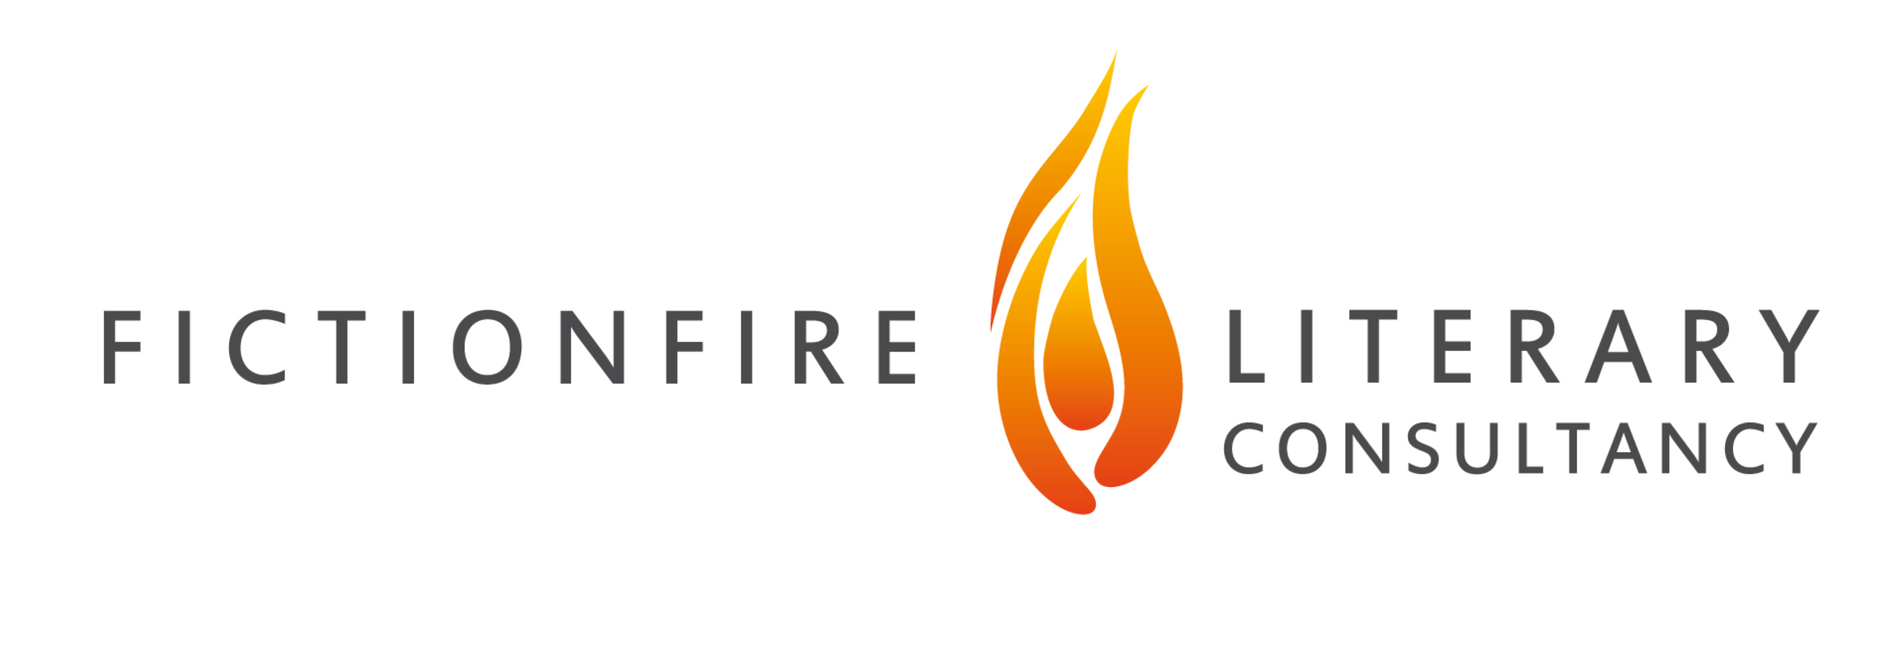 Fictionfire Literary Consultancy landscape logo with white background 1899x649 px.png